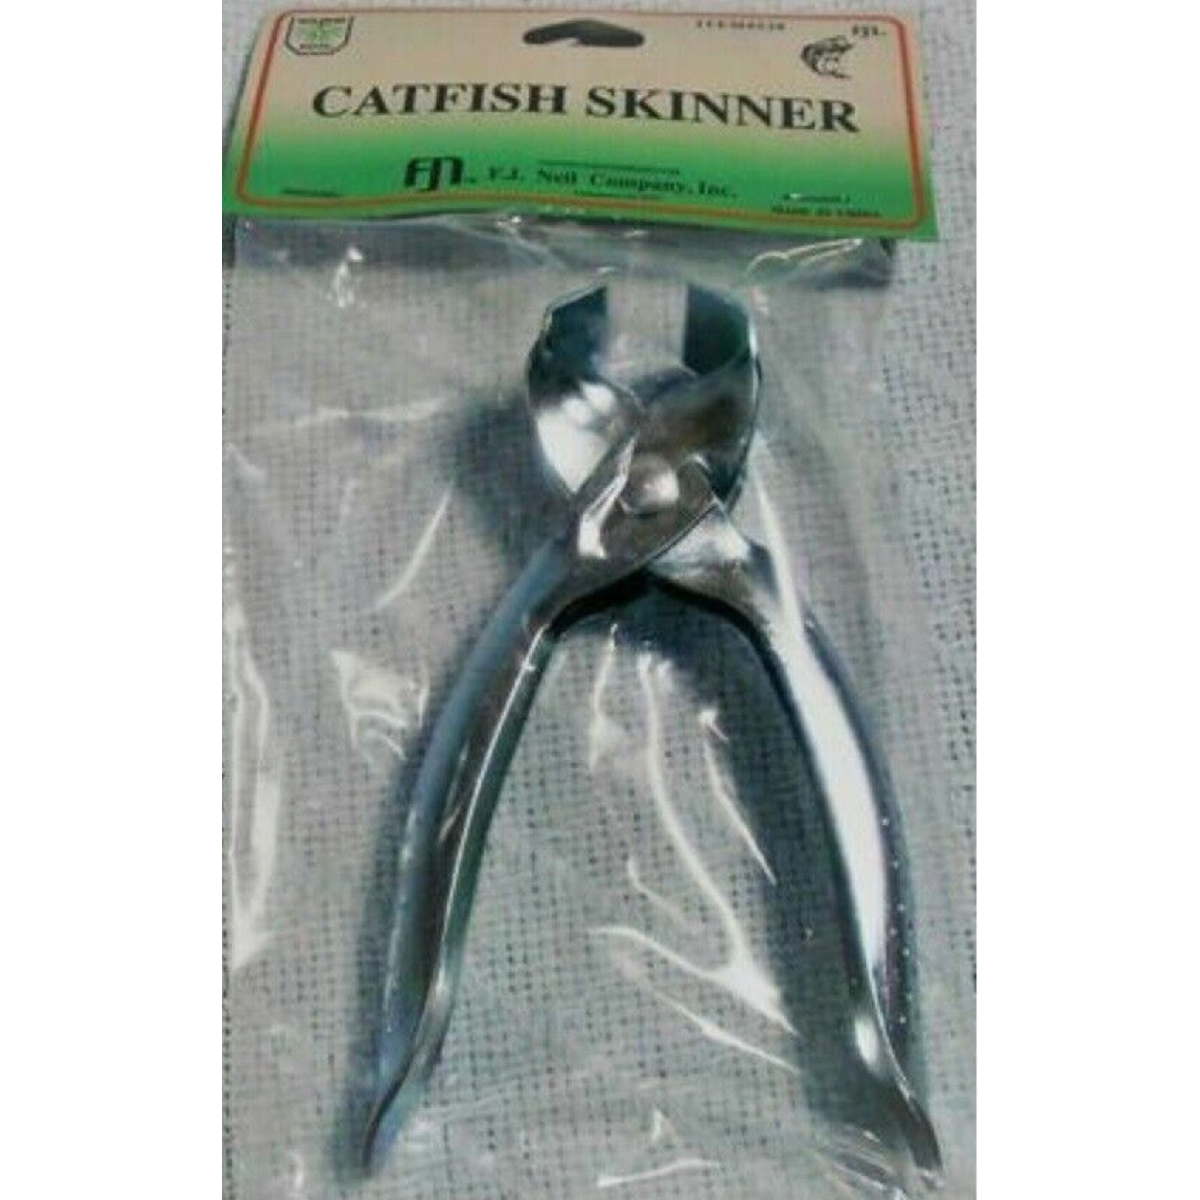 Photo of F.J. Neil Skinning Pliers for sale at United Tackle Shops.